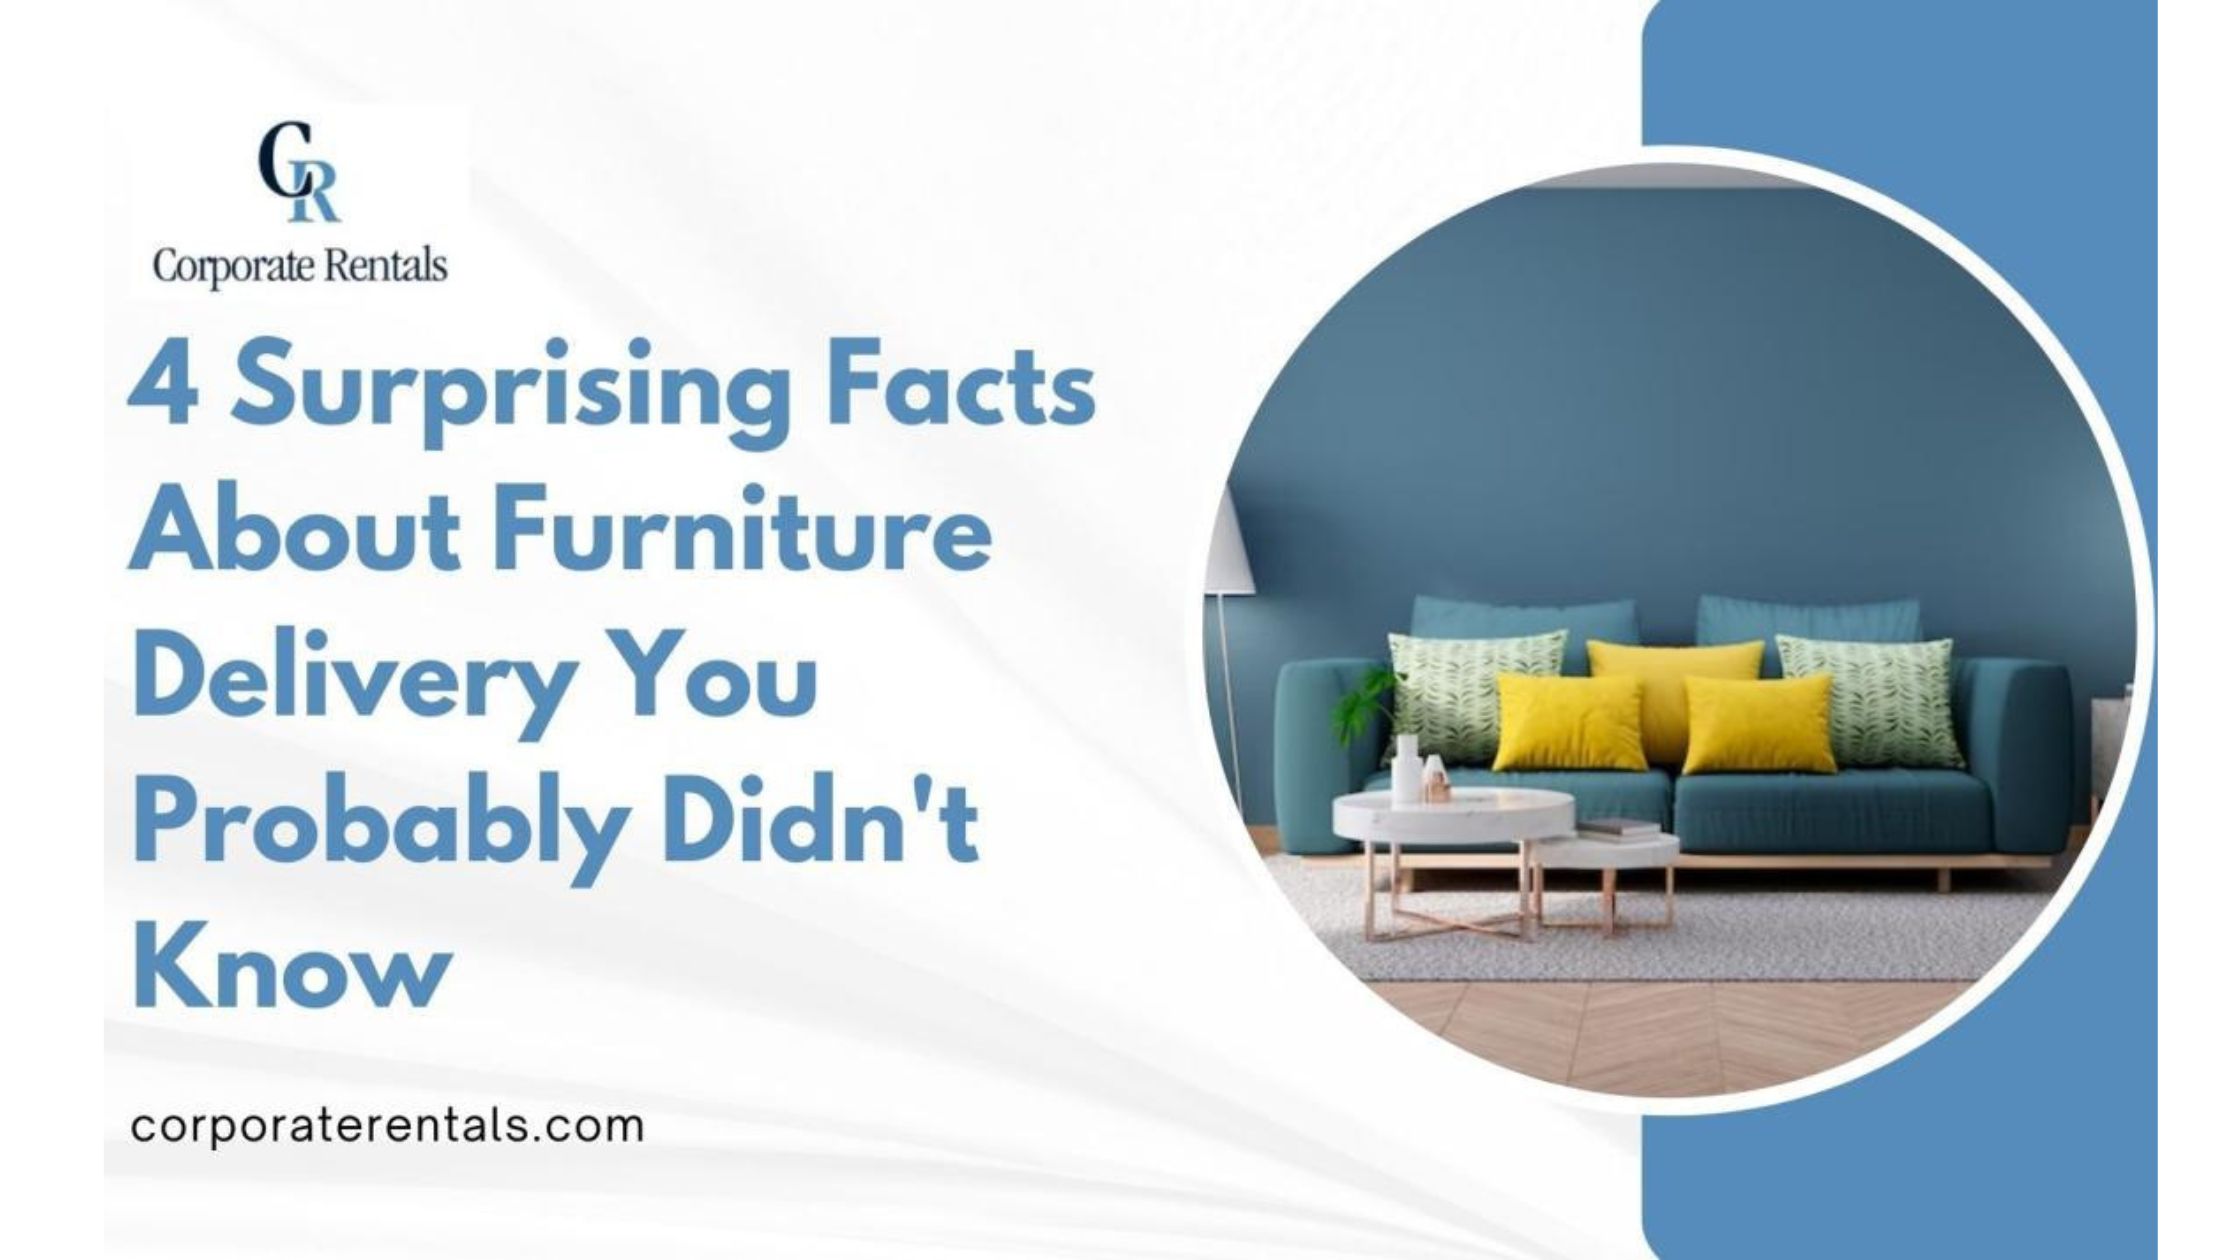 4 Surprising Facts About Furniture Delivery You Probably Didn’t Know